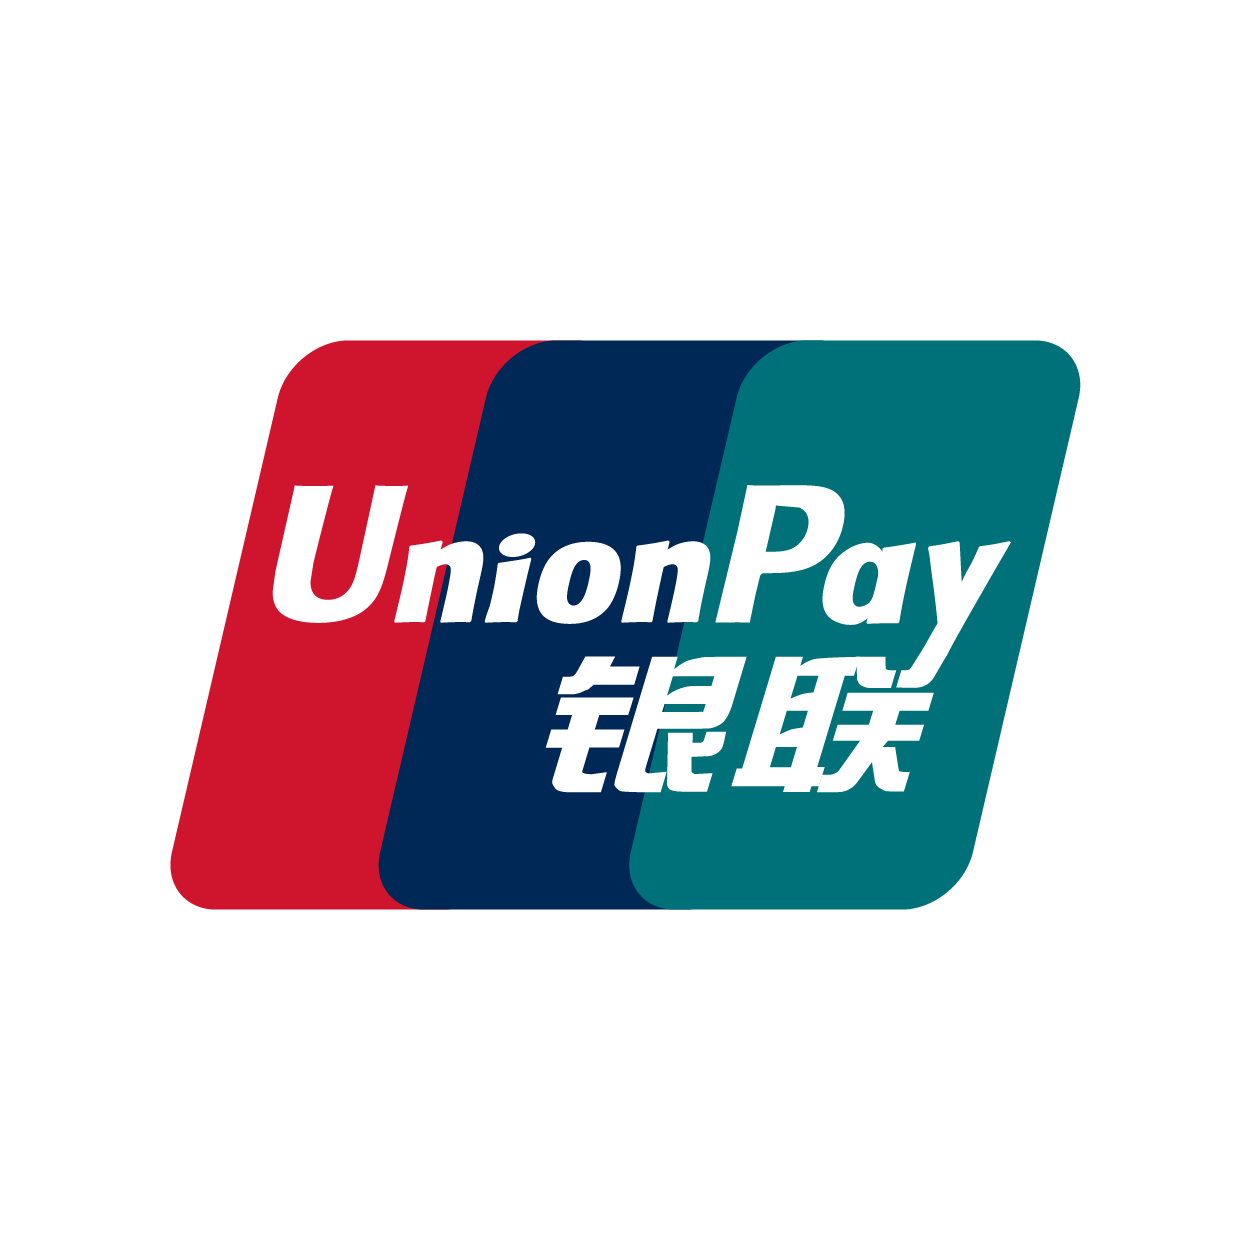 Payments more efficient by utilizing UnionPay as widely accepted payment method.